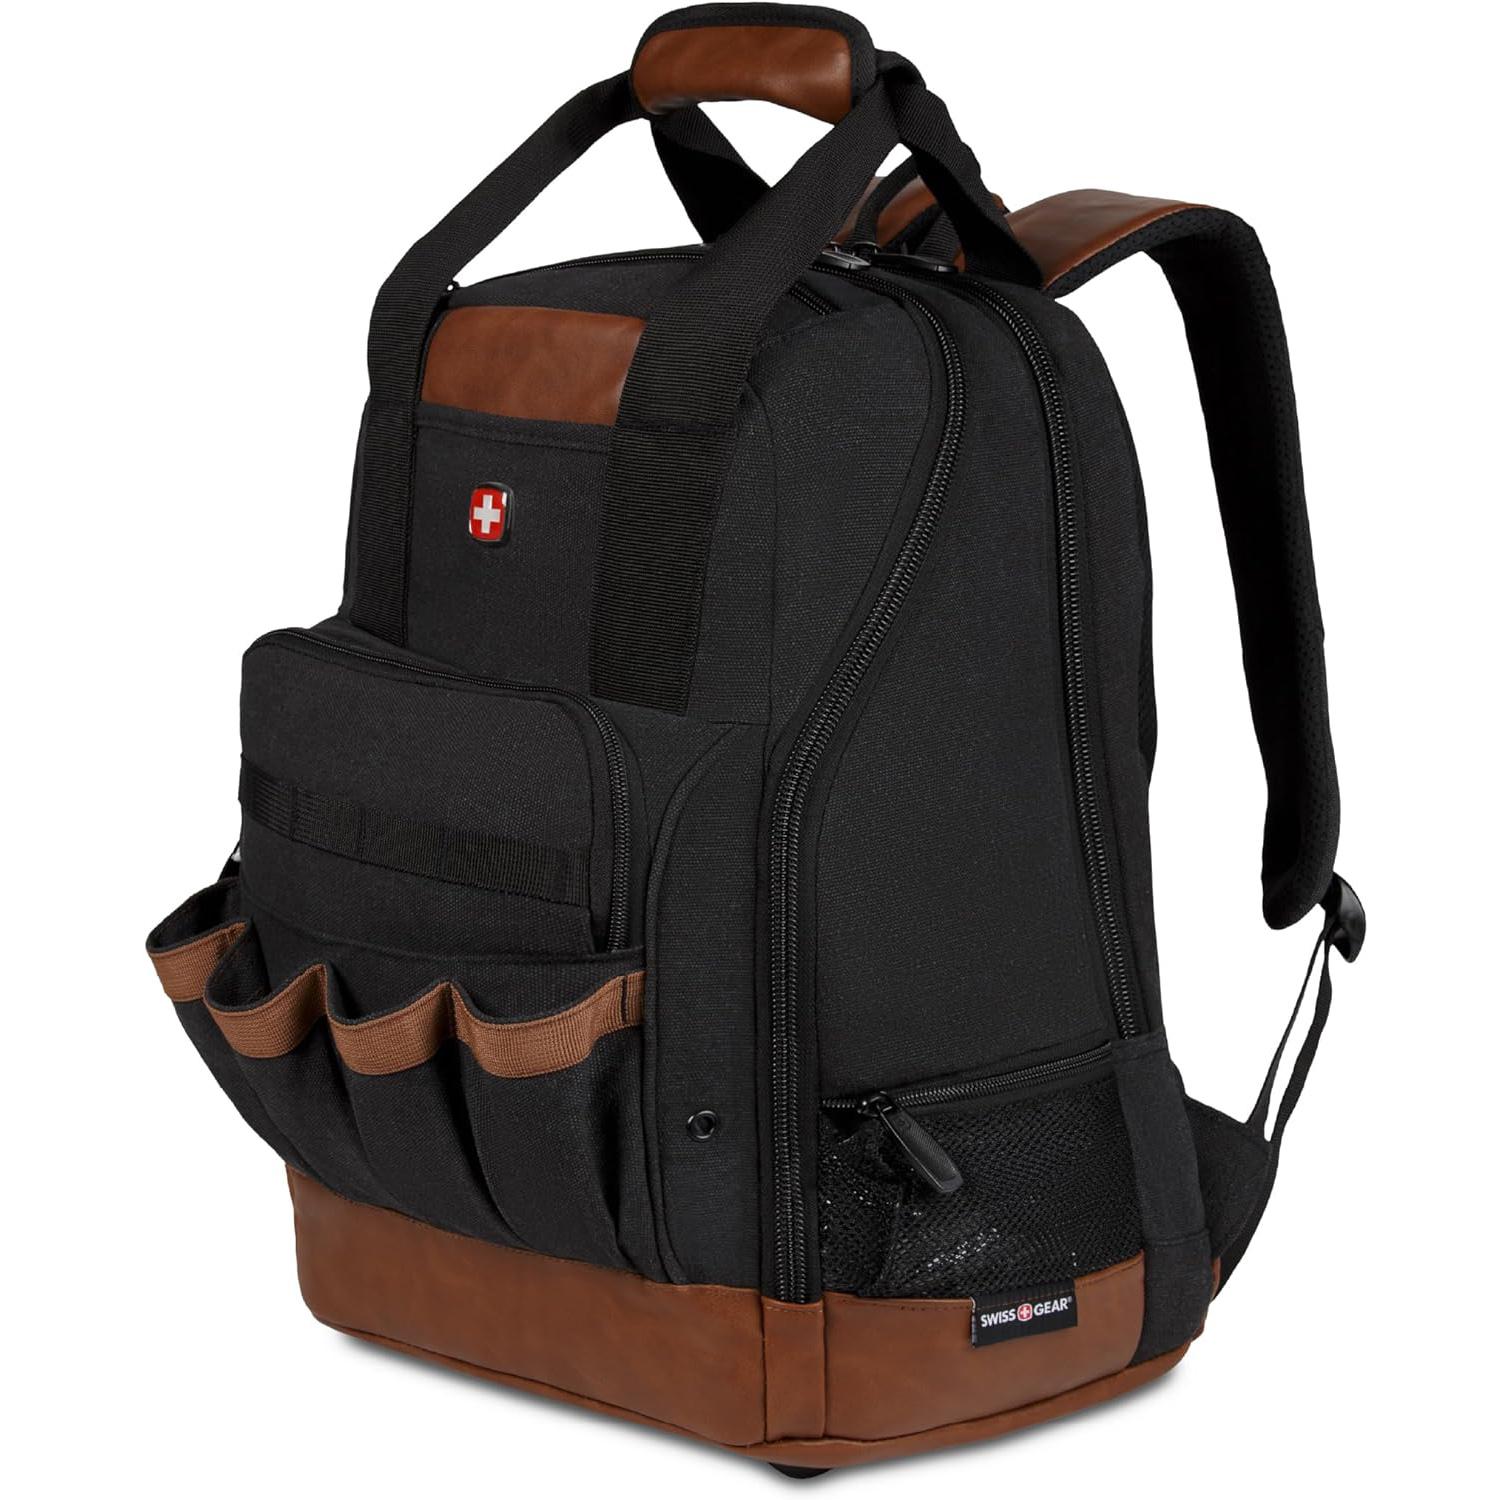 SwissGear 15in Laptop Work Tool Bag Backpack for $59.99 Shipped